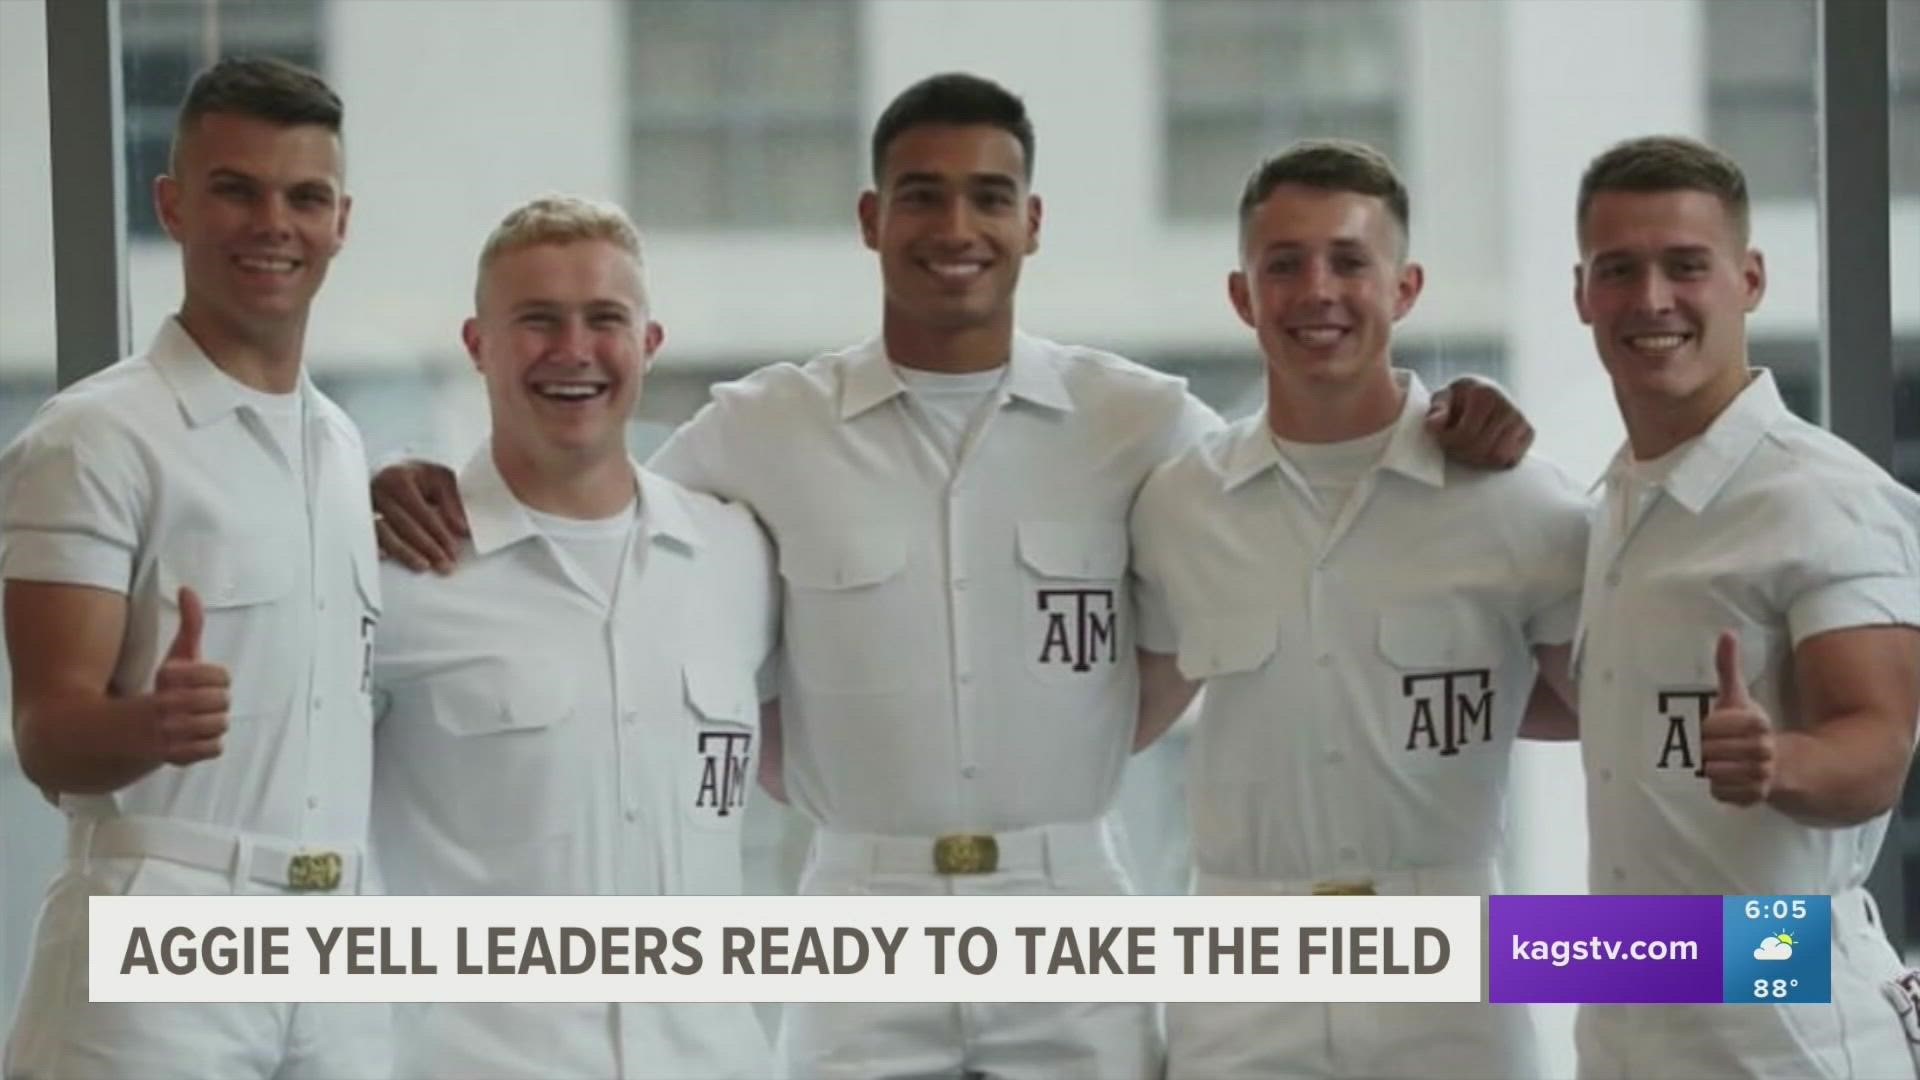 The Aggie Yell Leaders have been a staple of Texas A&M University since 1907.